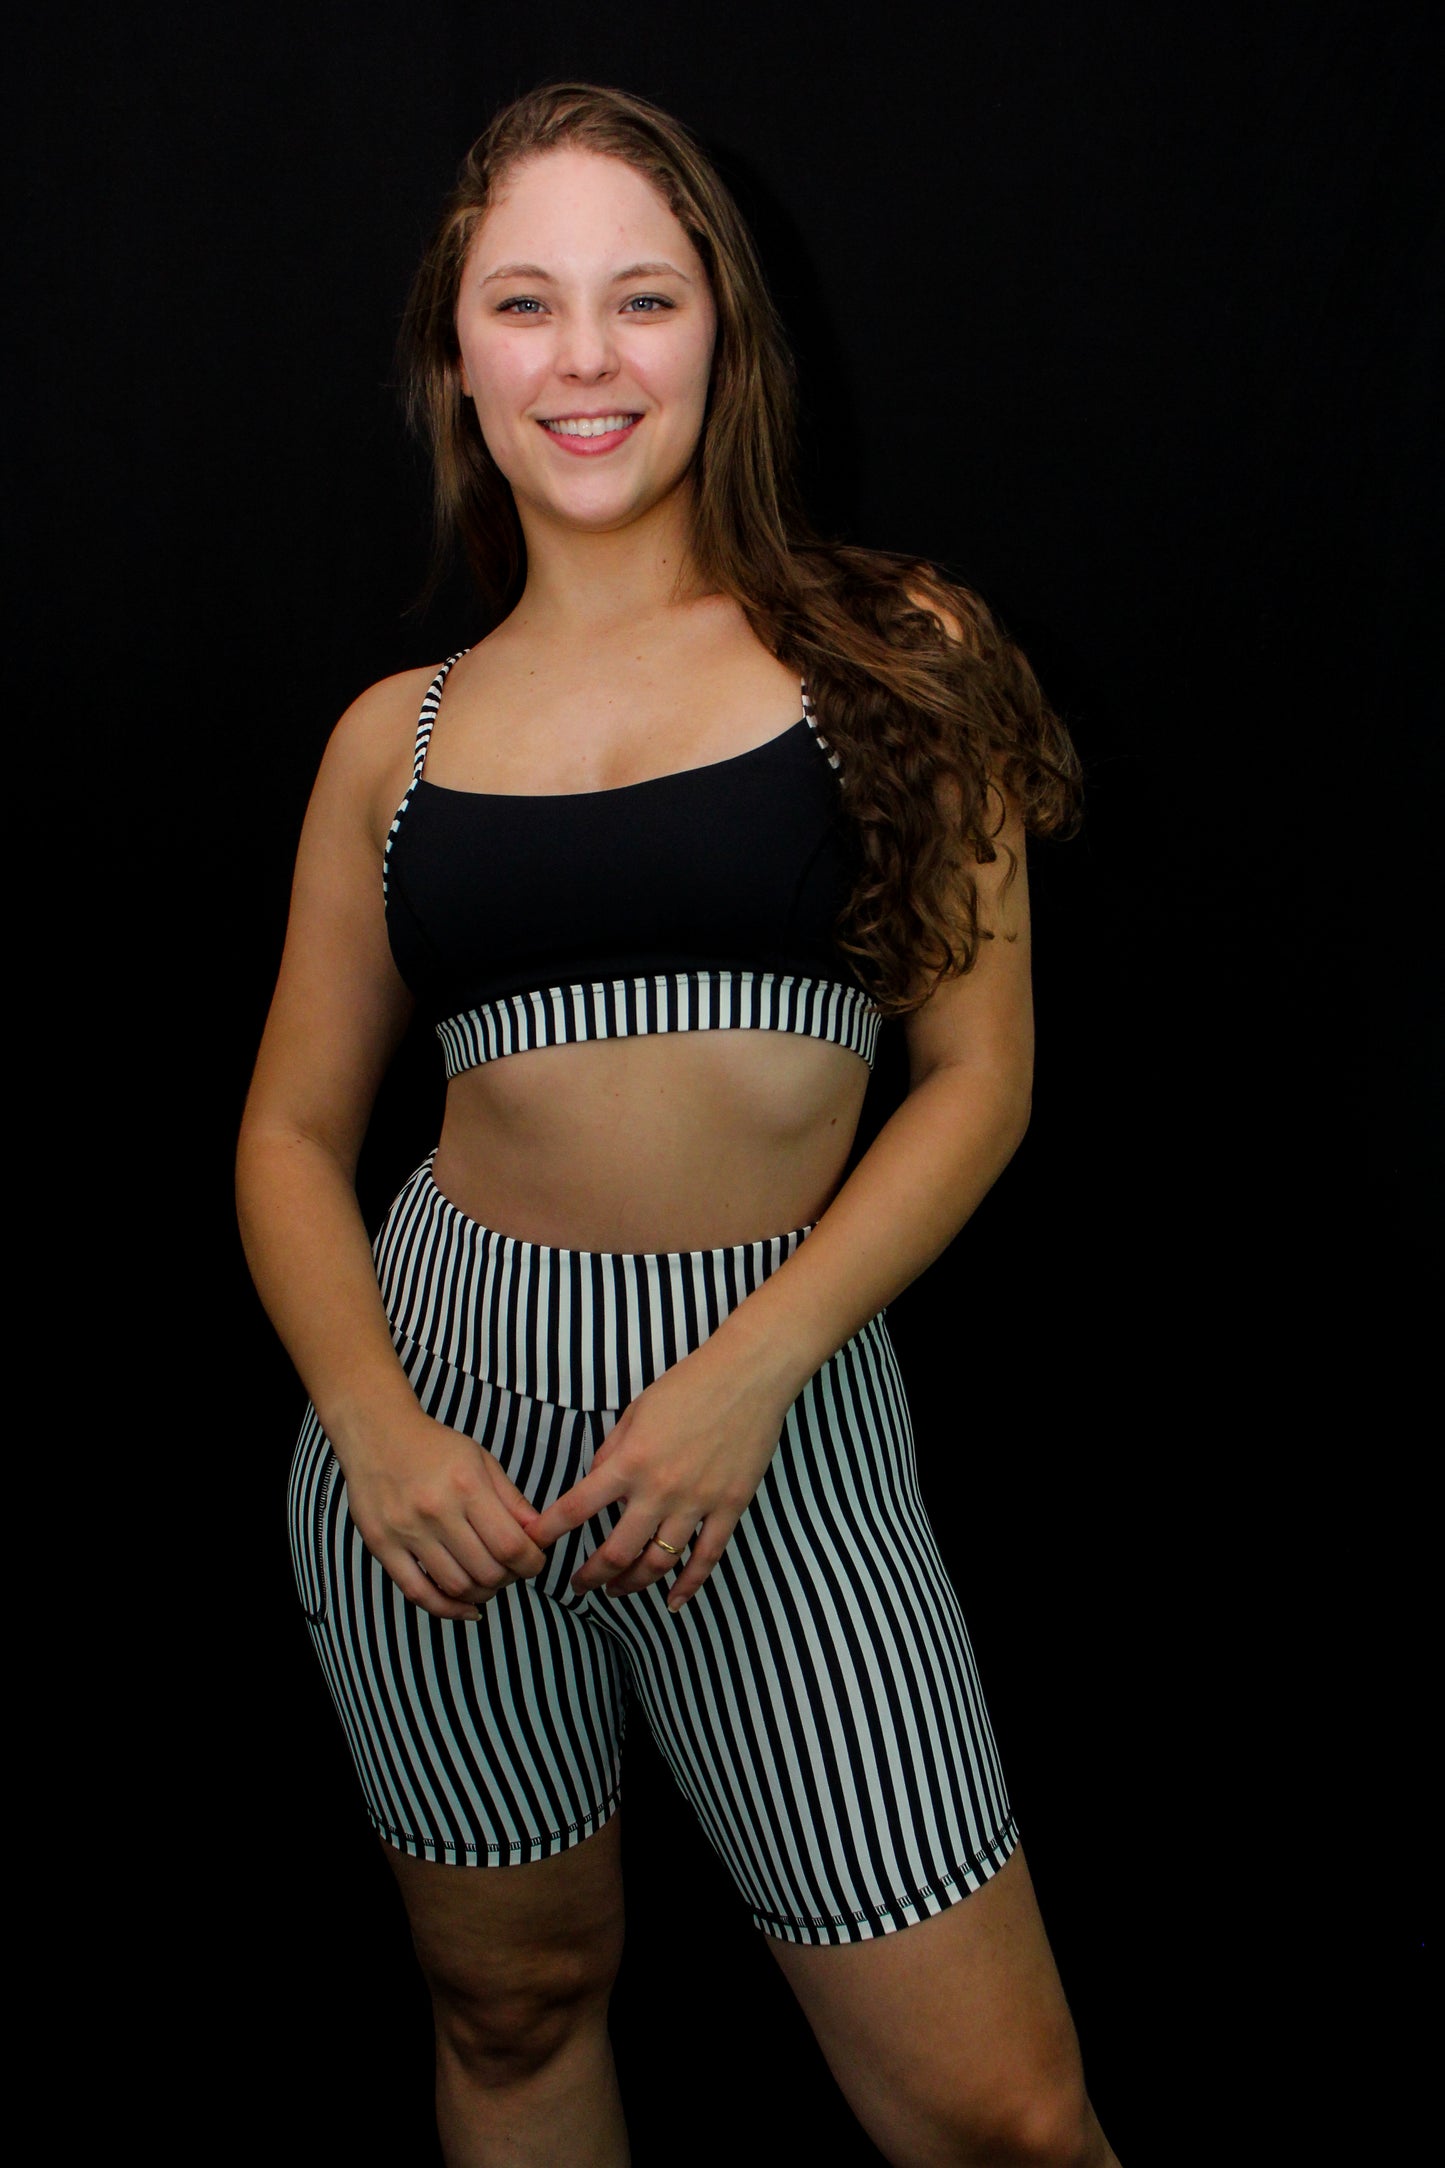 Black and white Stripe Sports Bra Classic style - The Best